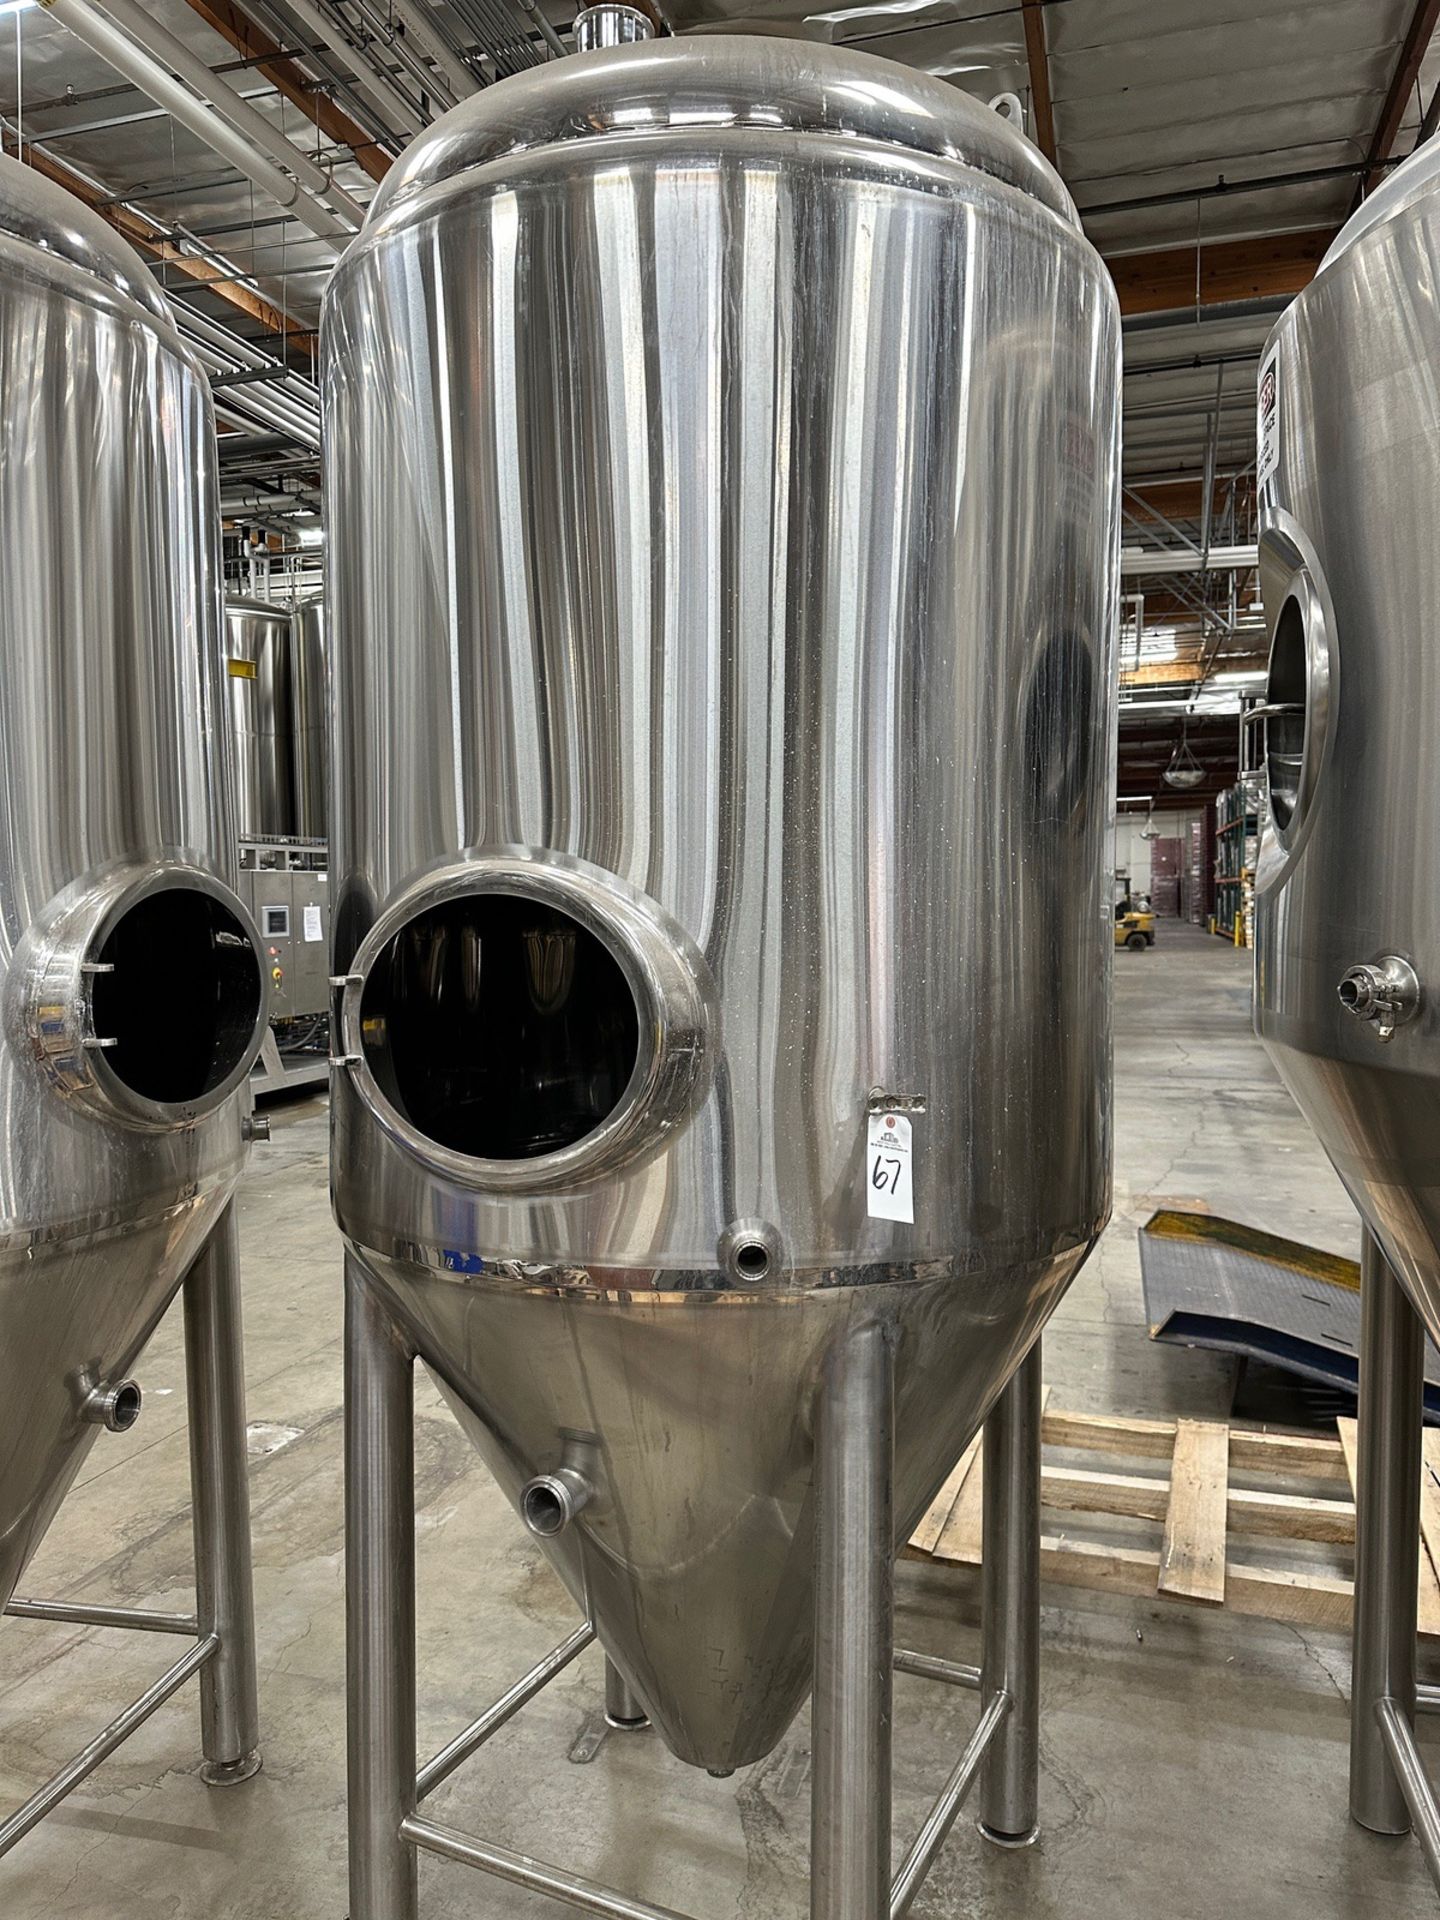 15 BBL Stainless Steel Fermentation Tank, Cone Bottom, Glycol Jacketed, No Fittings | Rig Fee $750